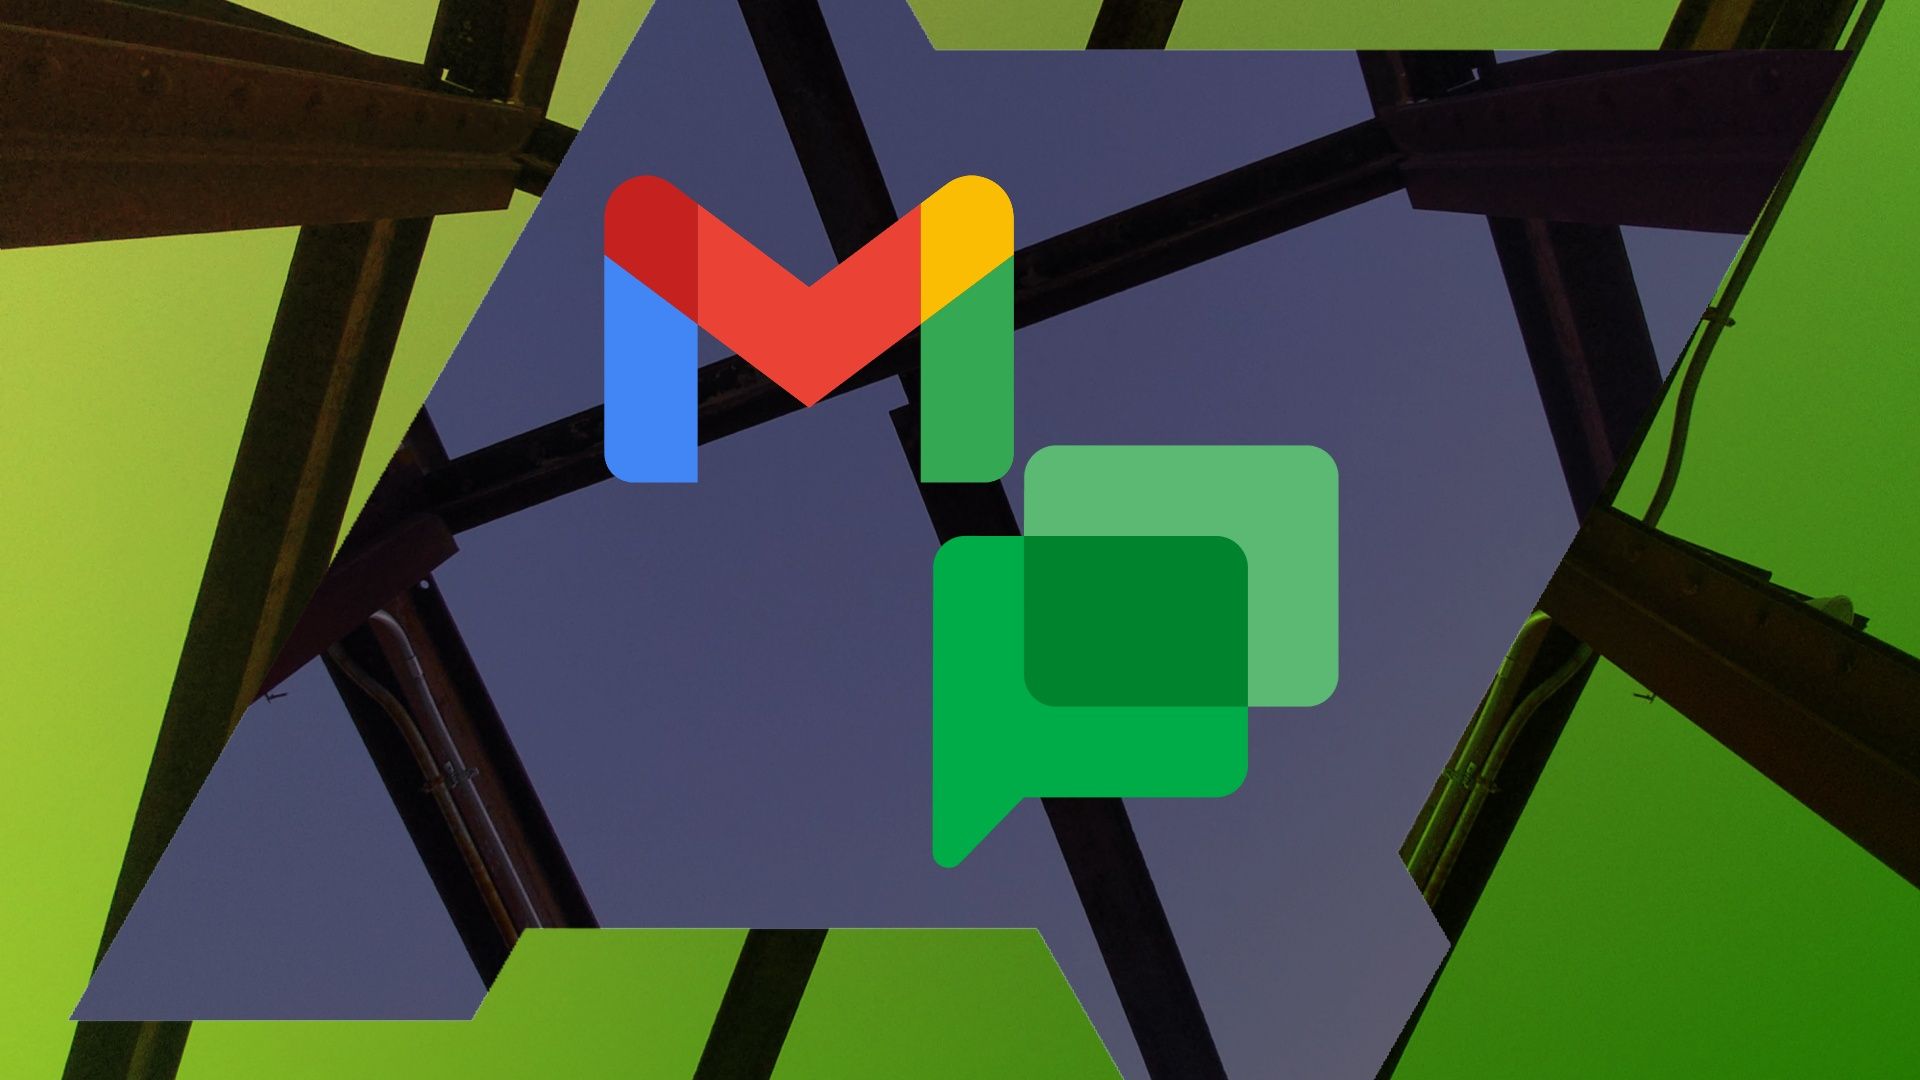 The Google Gmail and Chat logos against an abstract background